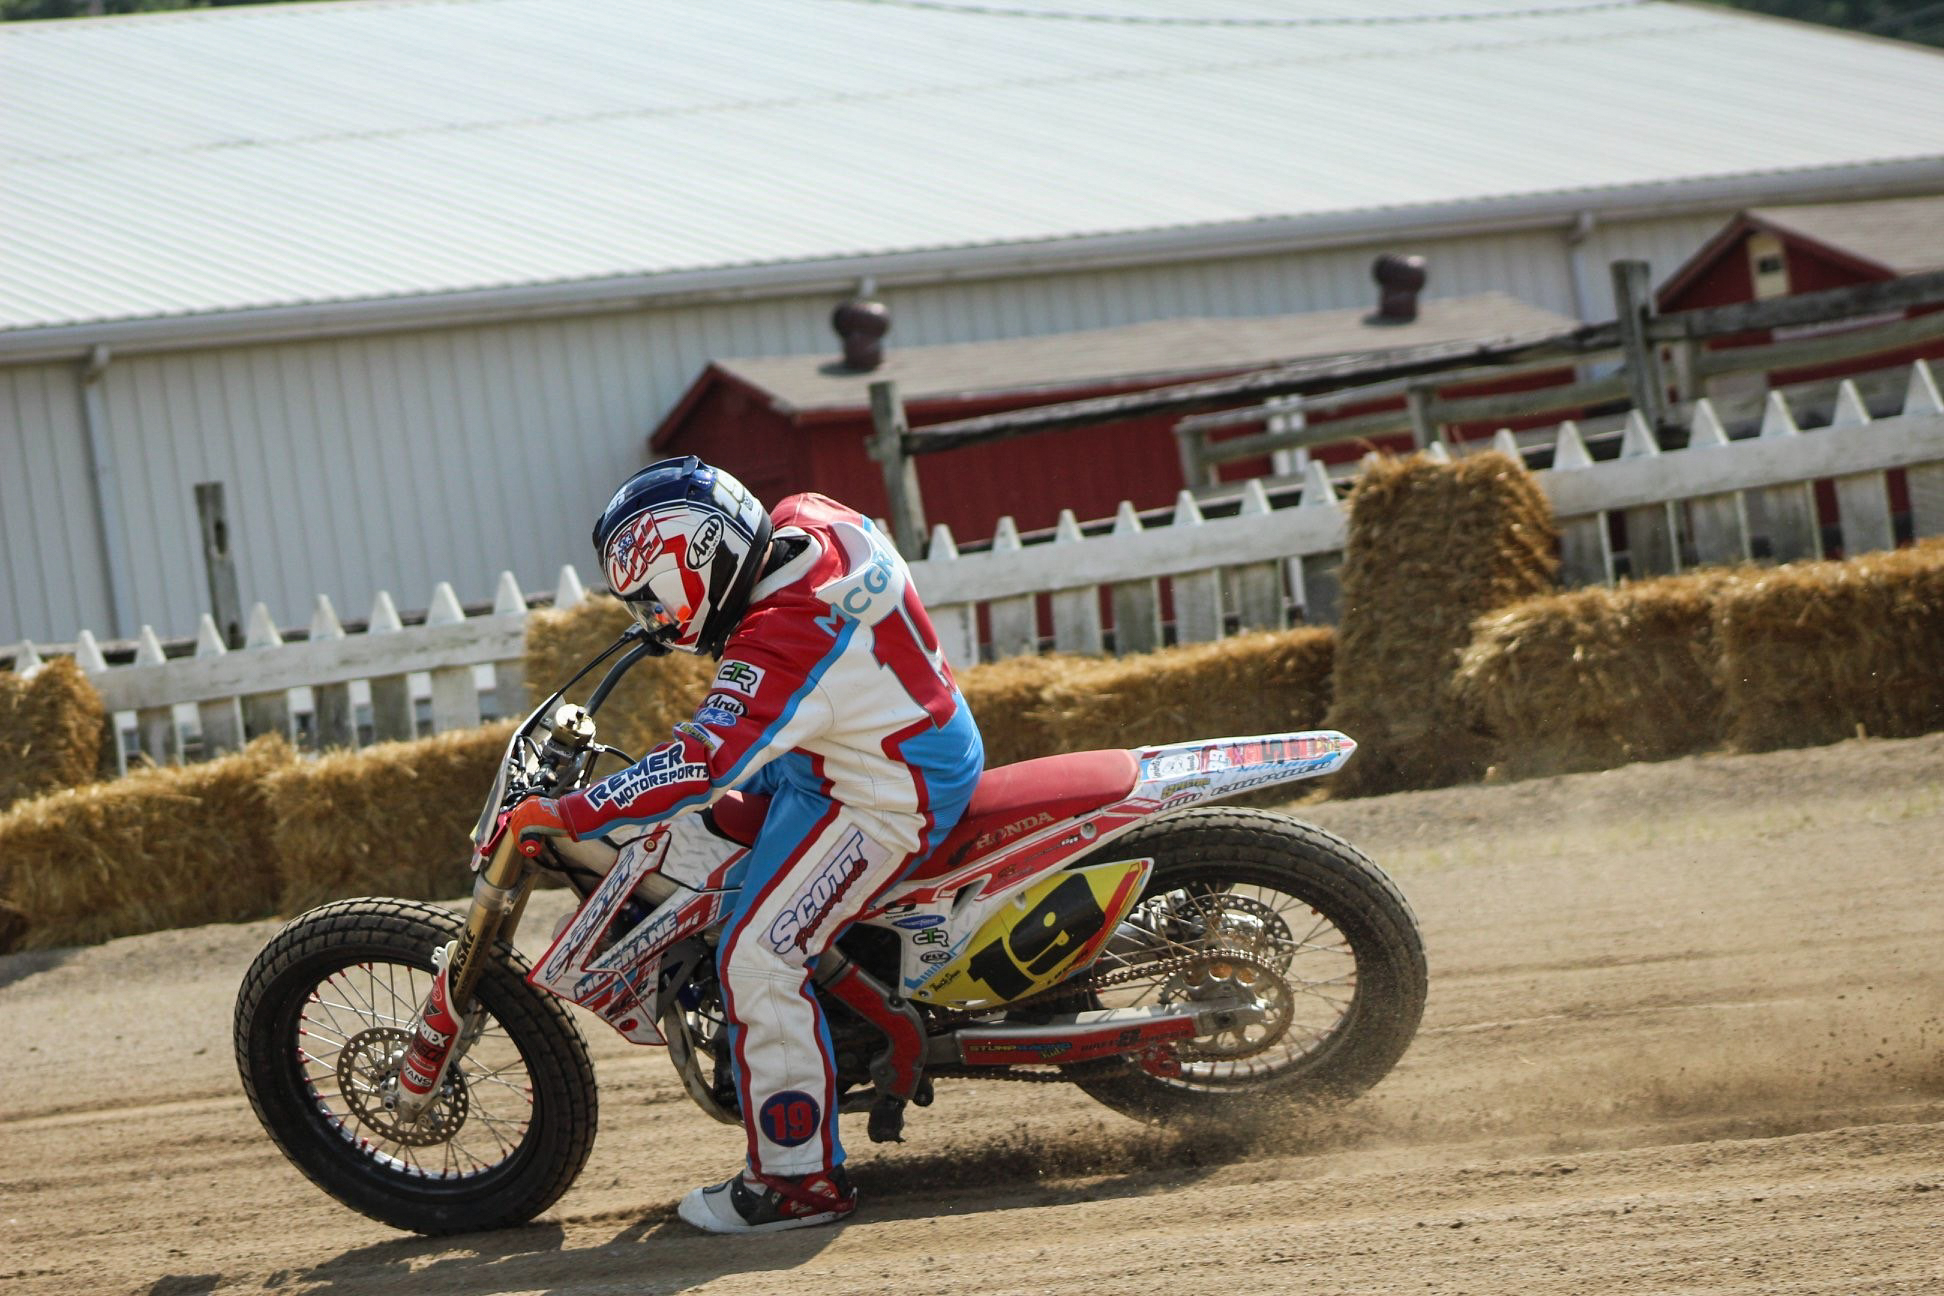 The Ins And Outs Of Converting A Motocross Bike To A Flat Track Singles Race Machine